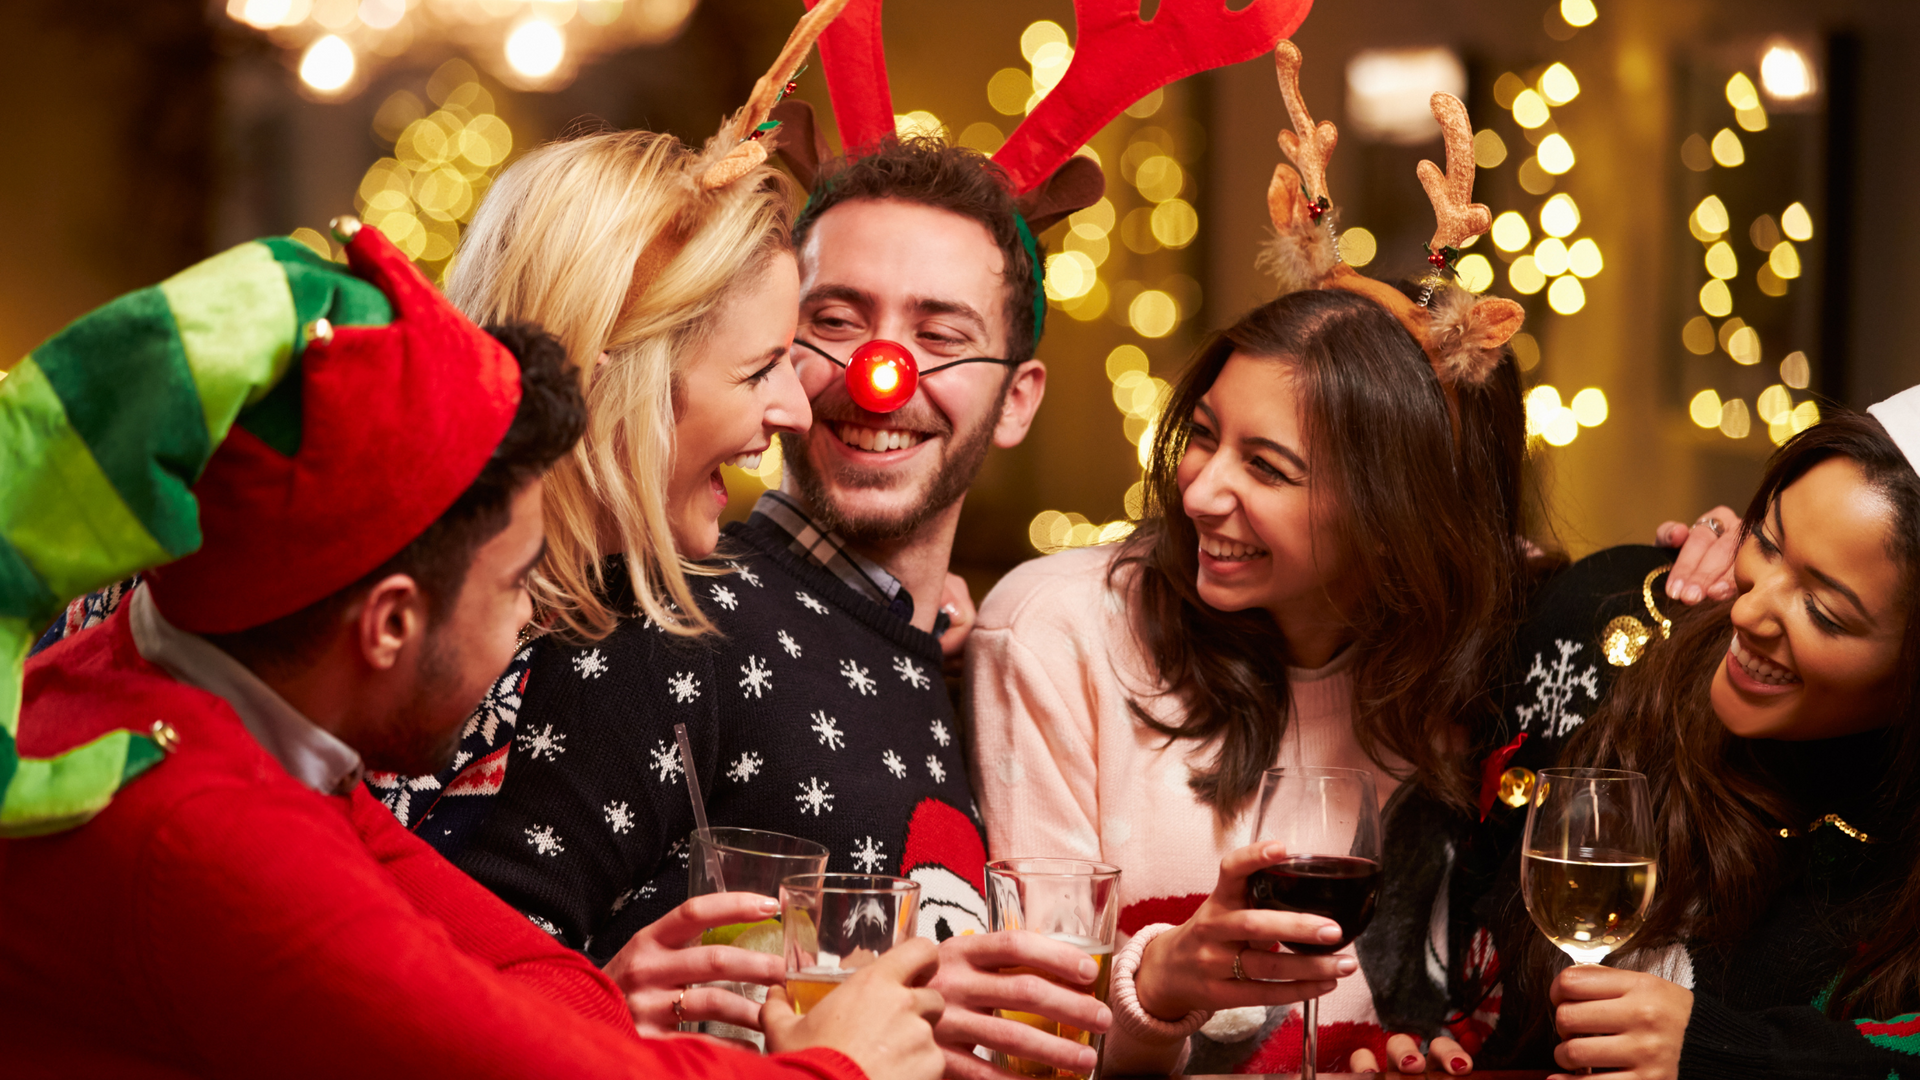 Image with five friends dressed in Christmas attire. They have alcoholic drinks in their hands and are smiling and laughing while looking at each other.